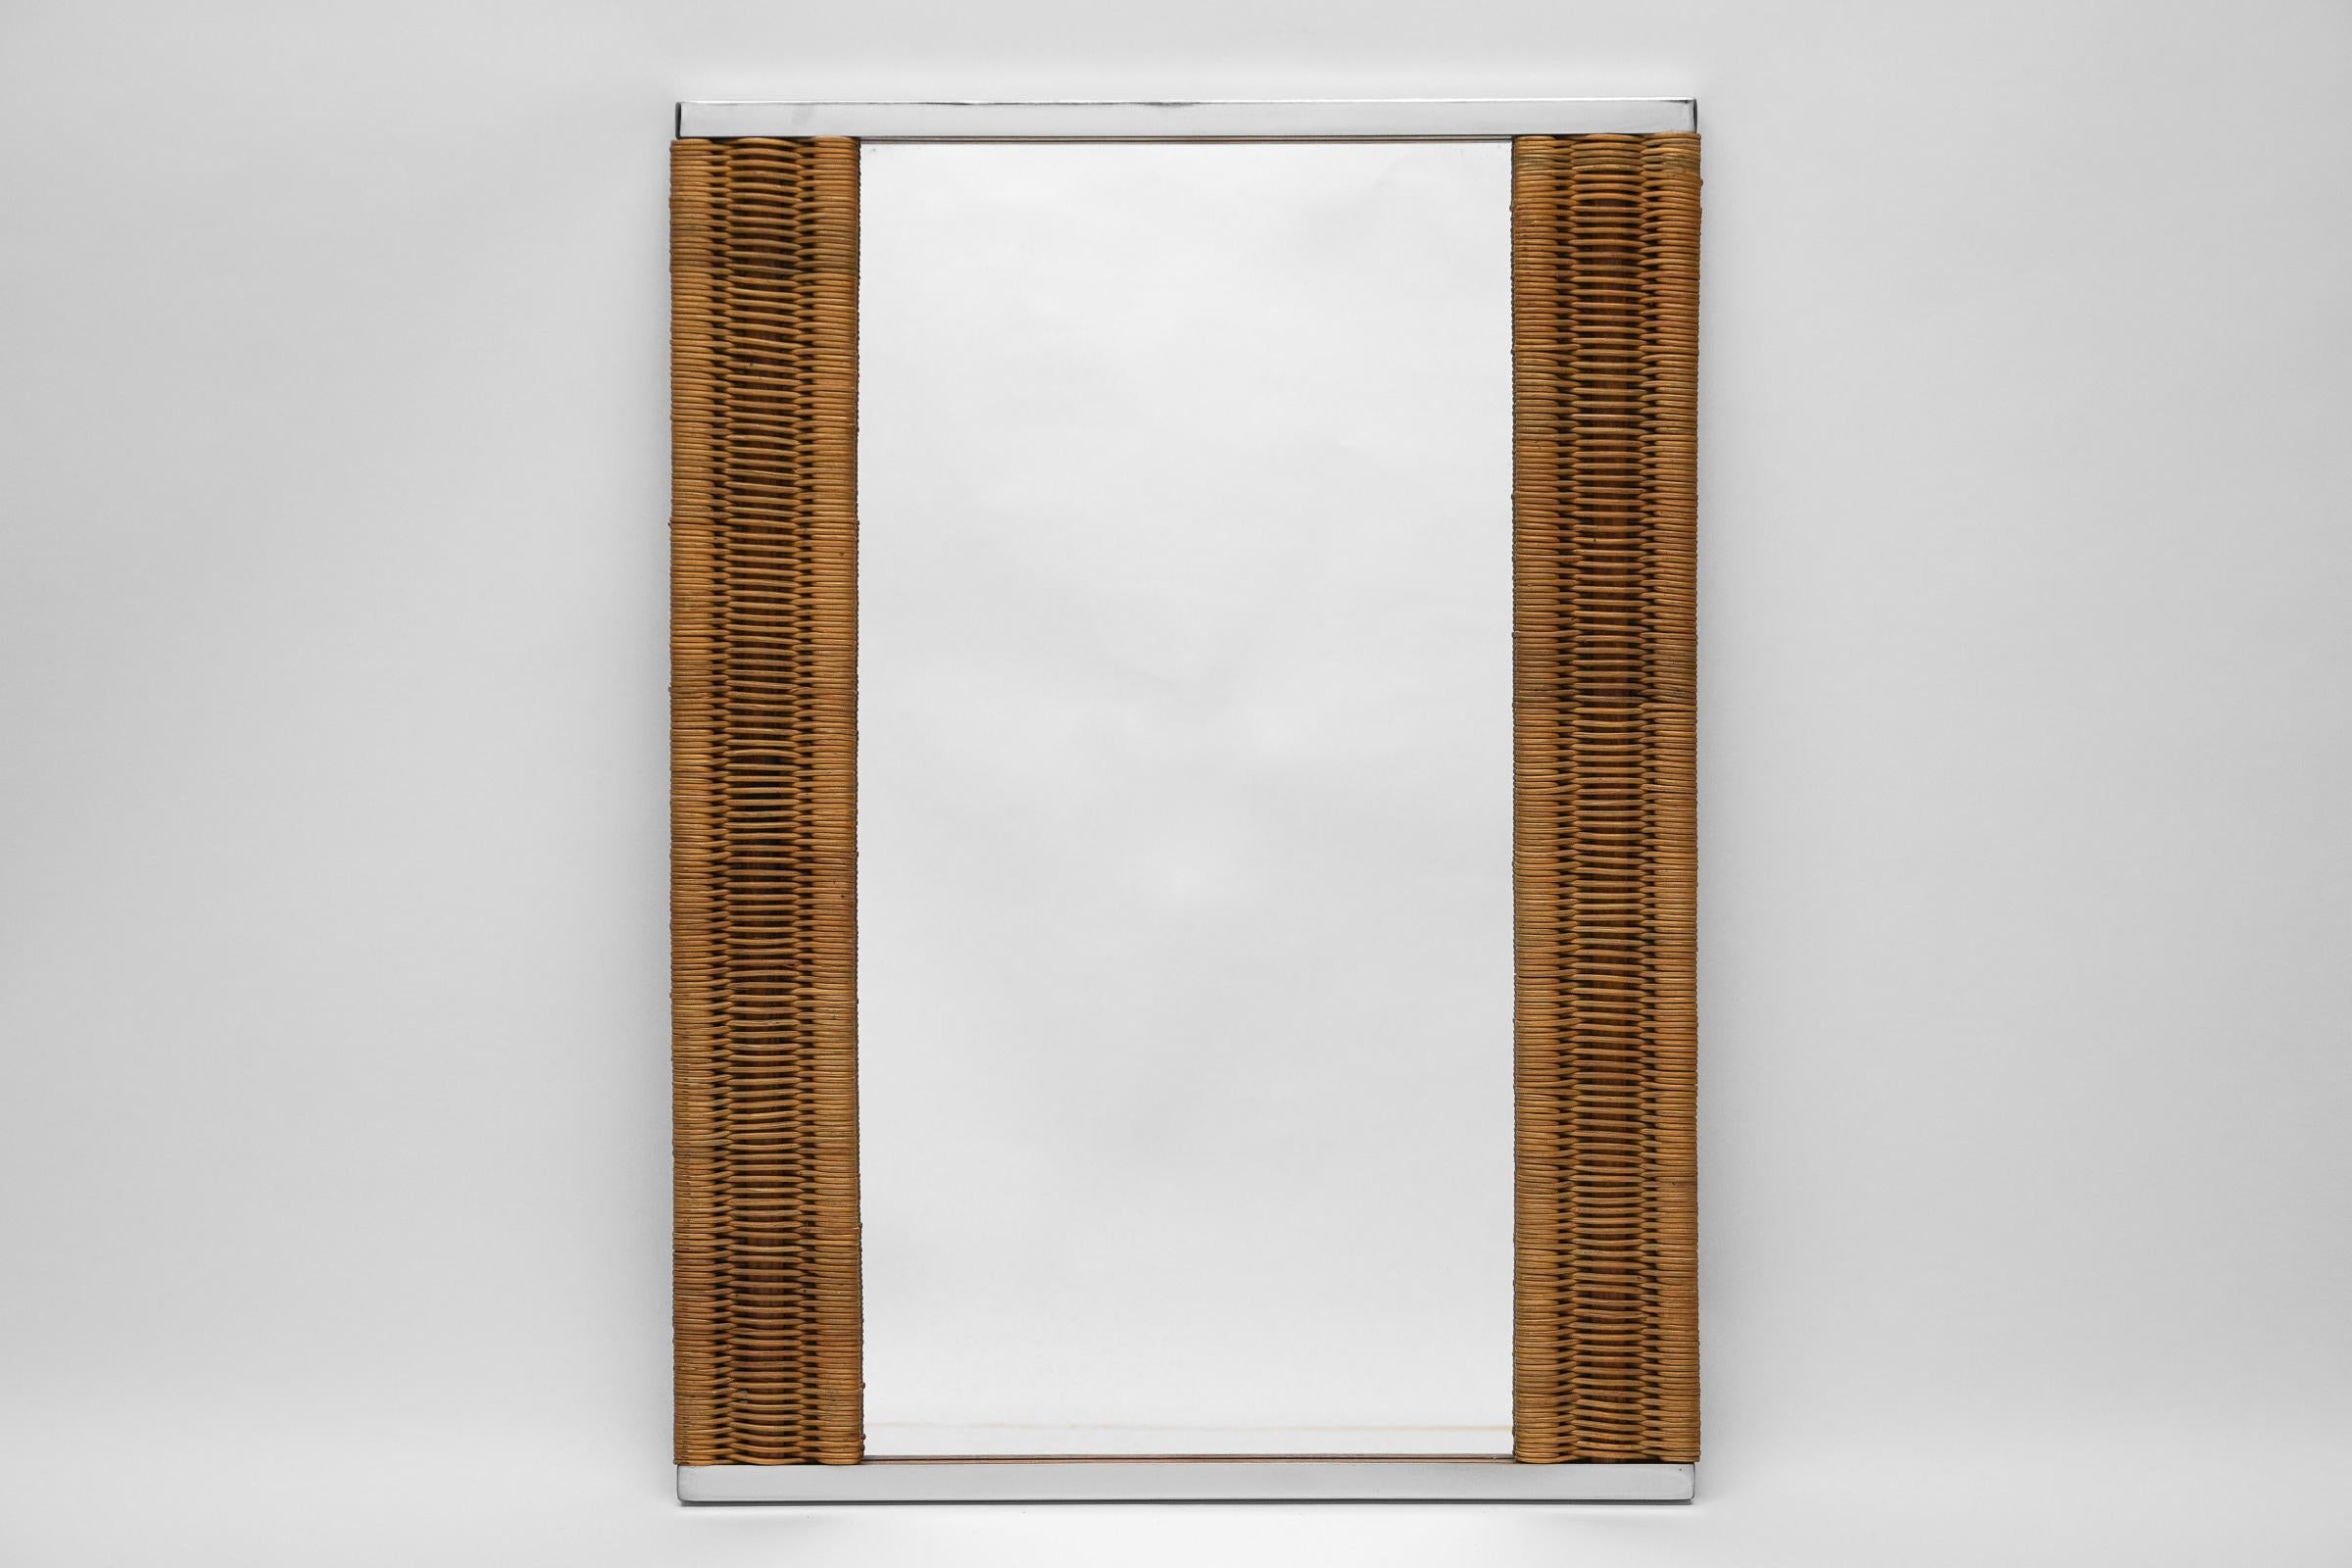 Very beautiful rectangular wall mirror made of 4-sided chrome frame with rattan weave. In the style of Gabriella Crespi.